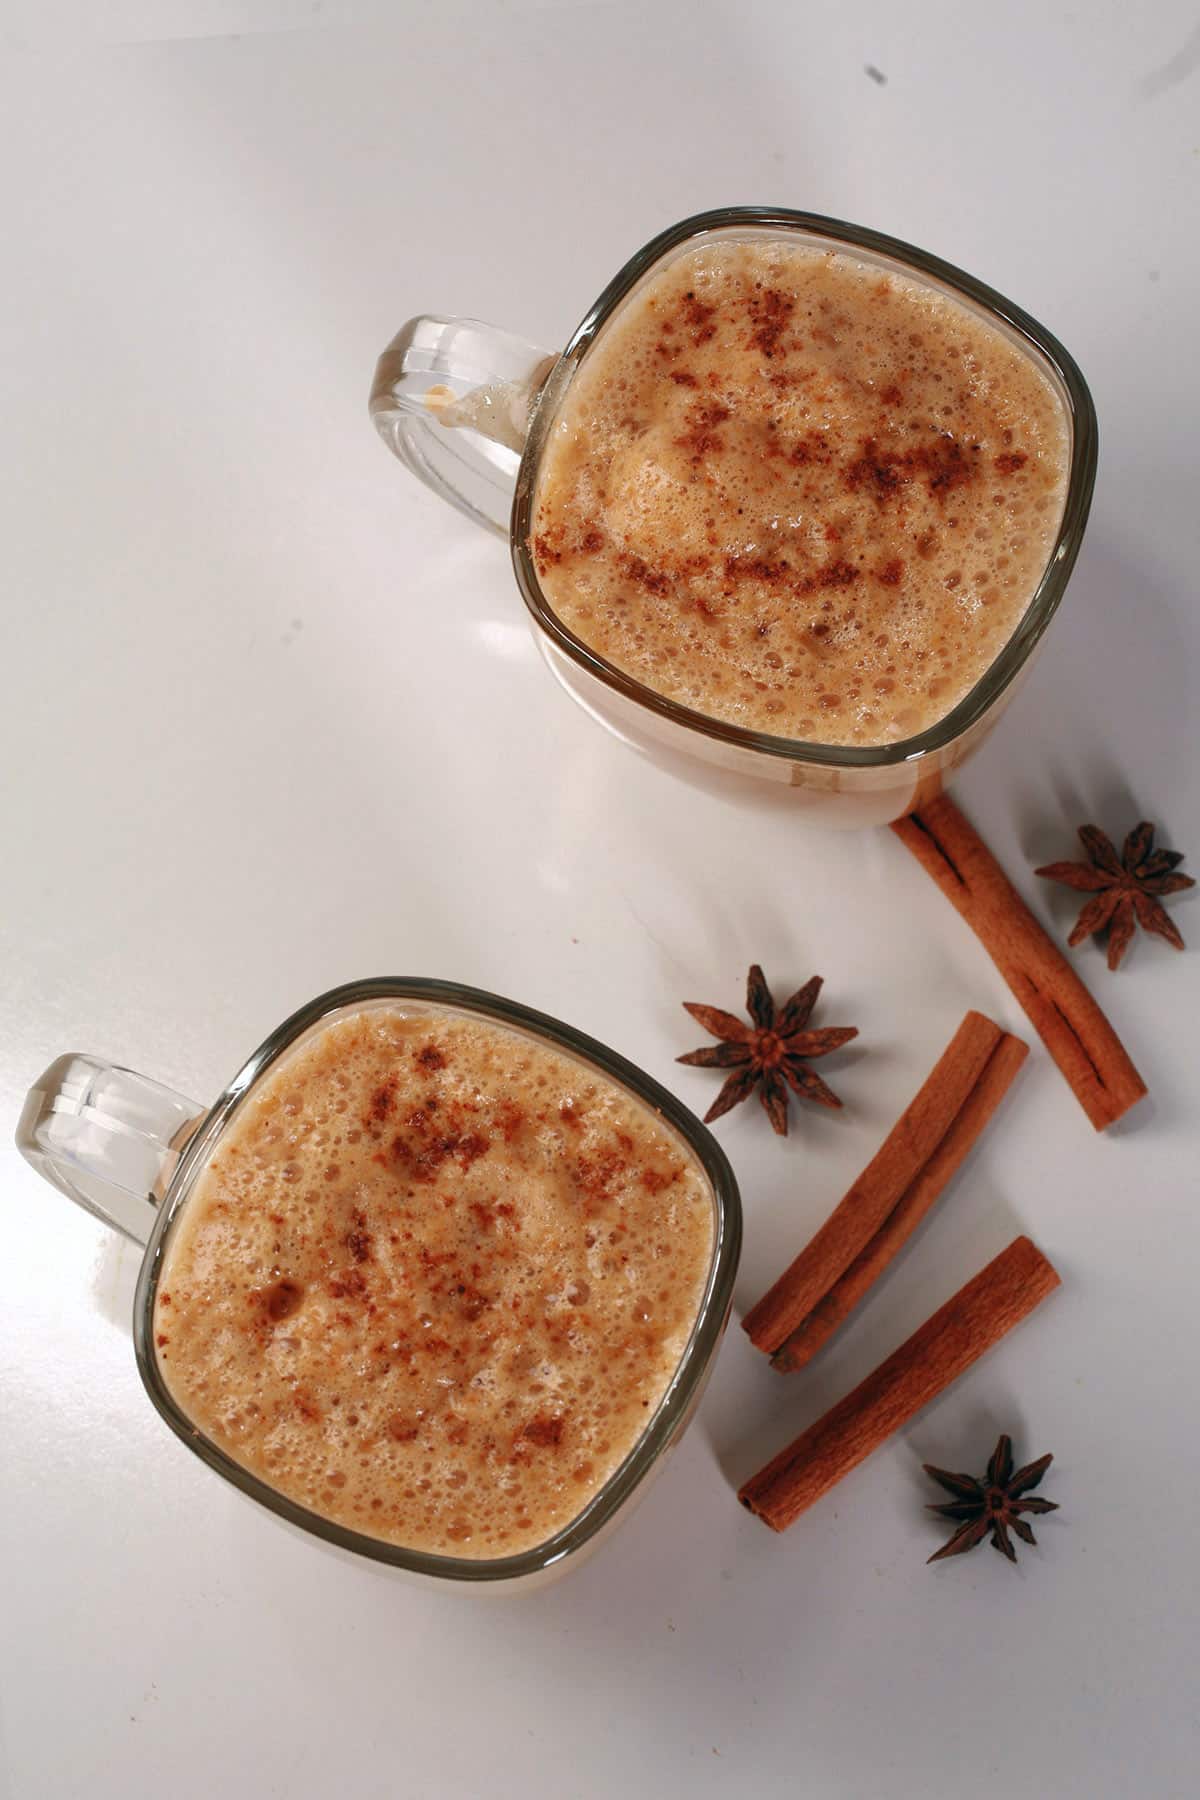 2 Pumpkin Chai Lattes in glass mugs, with cinnamon sticks and star anise around them.